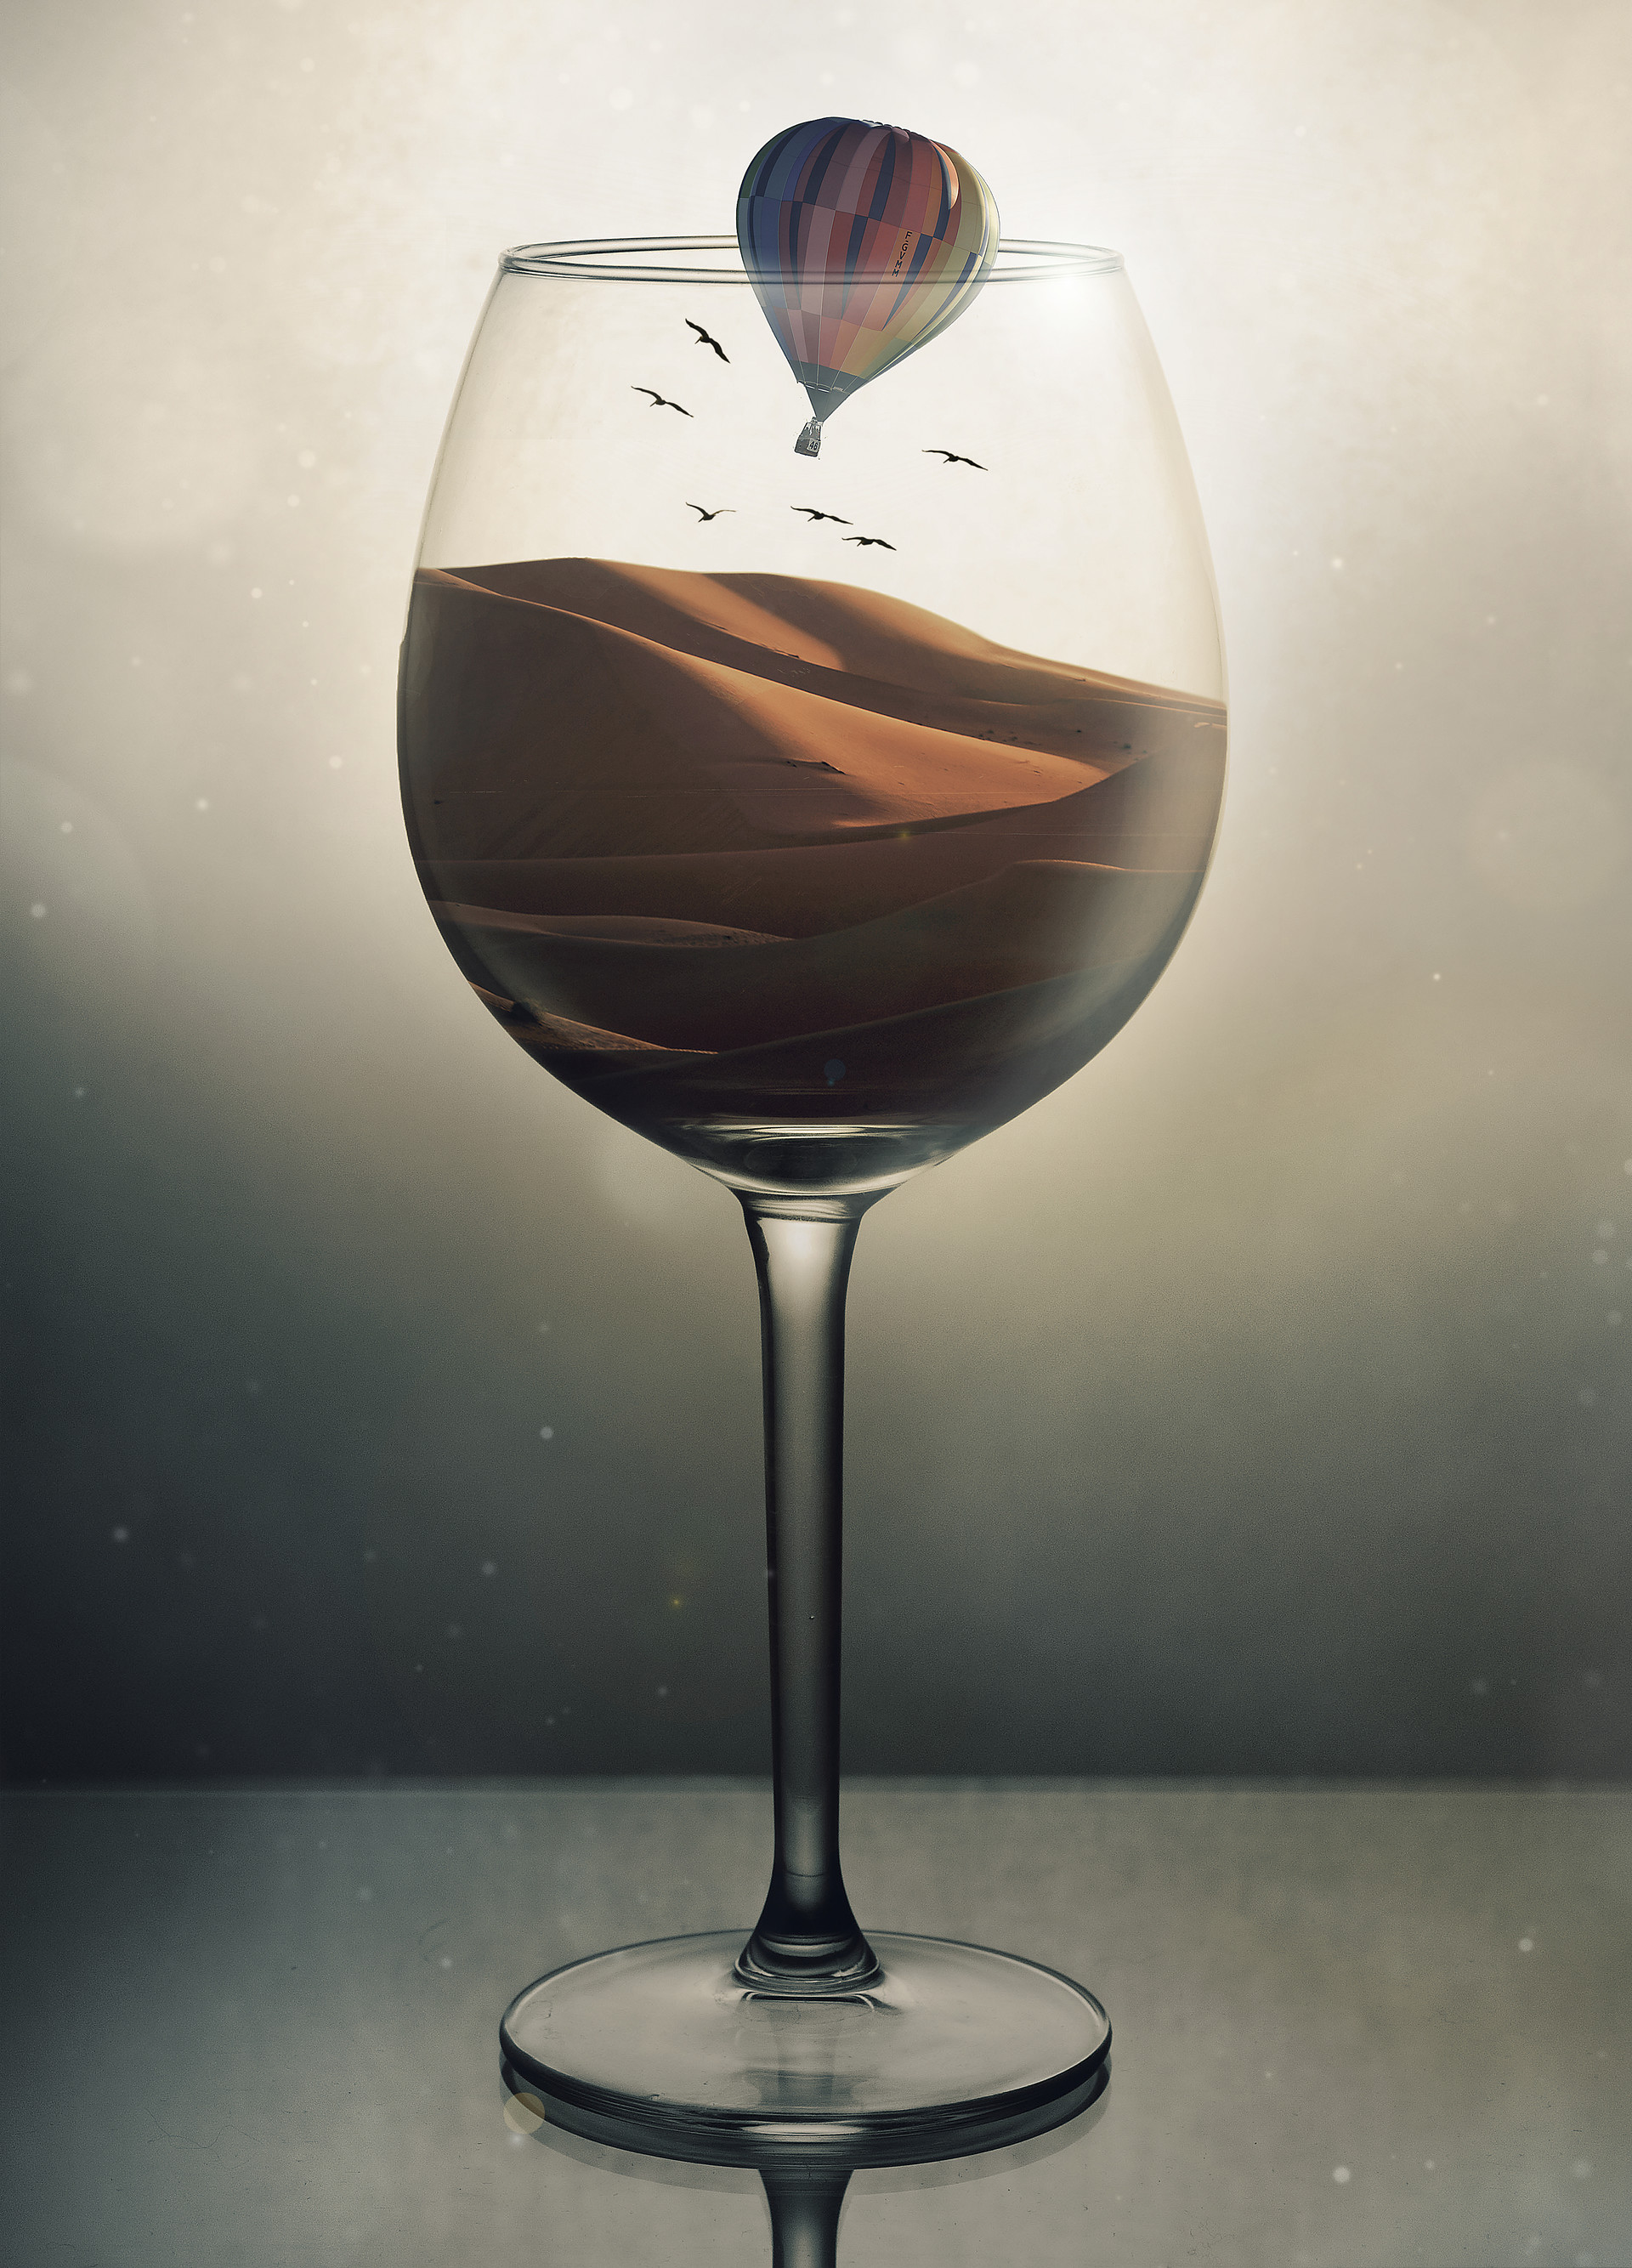 Widescreen image illusion, wineglass, goblet, miscellaneous